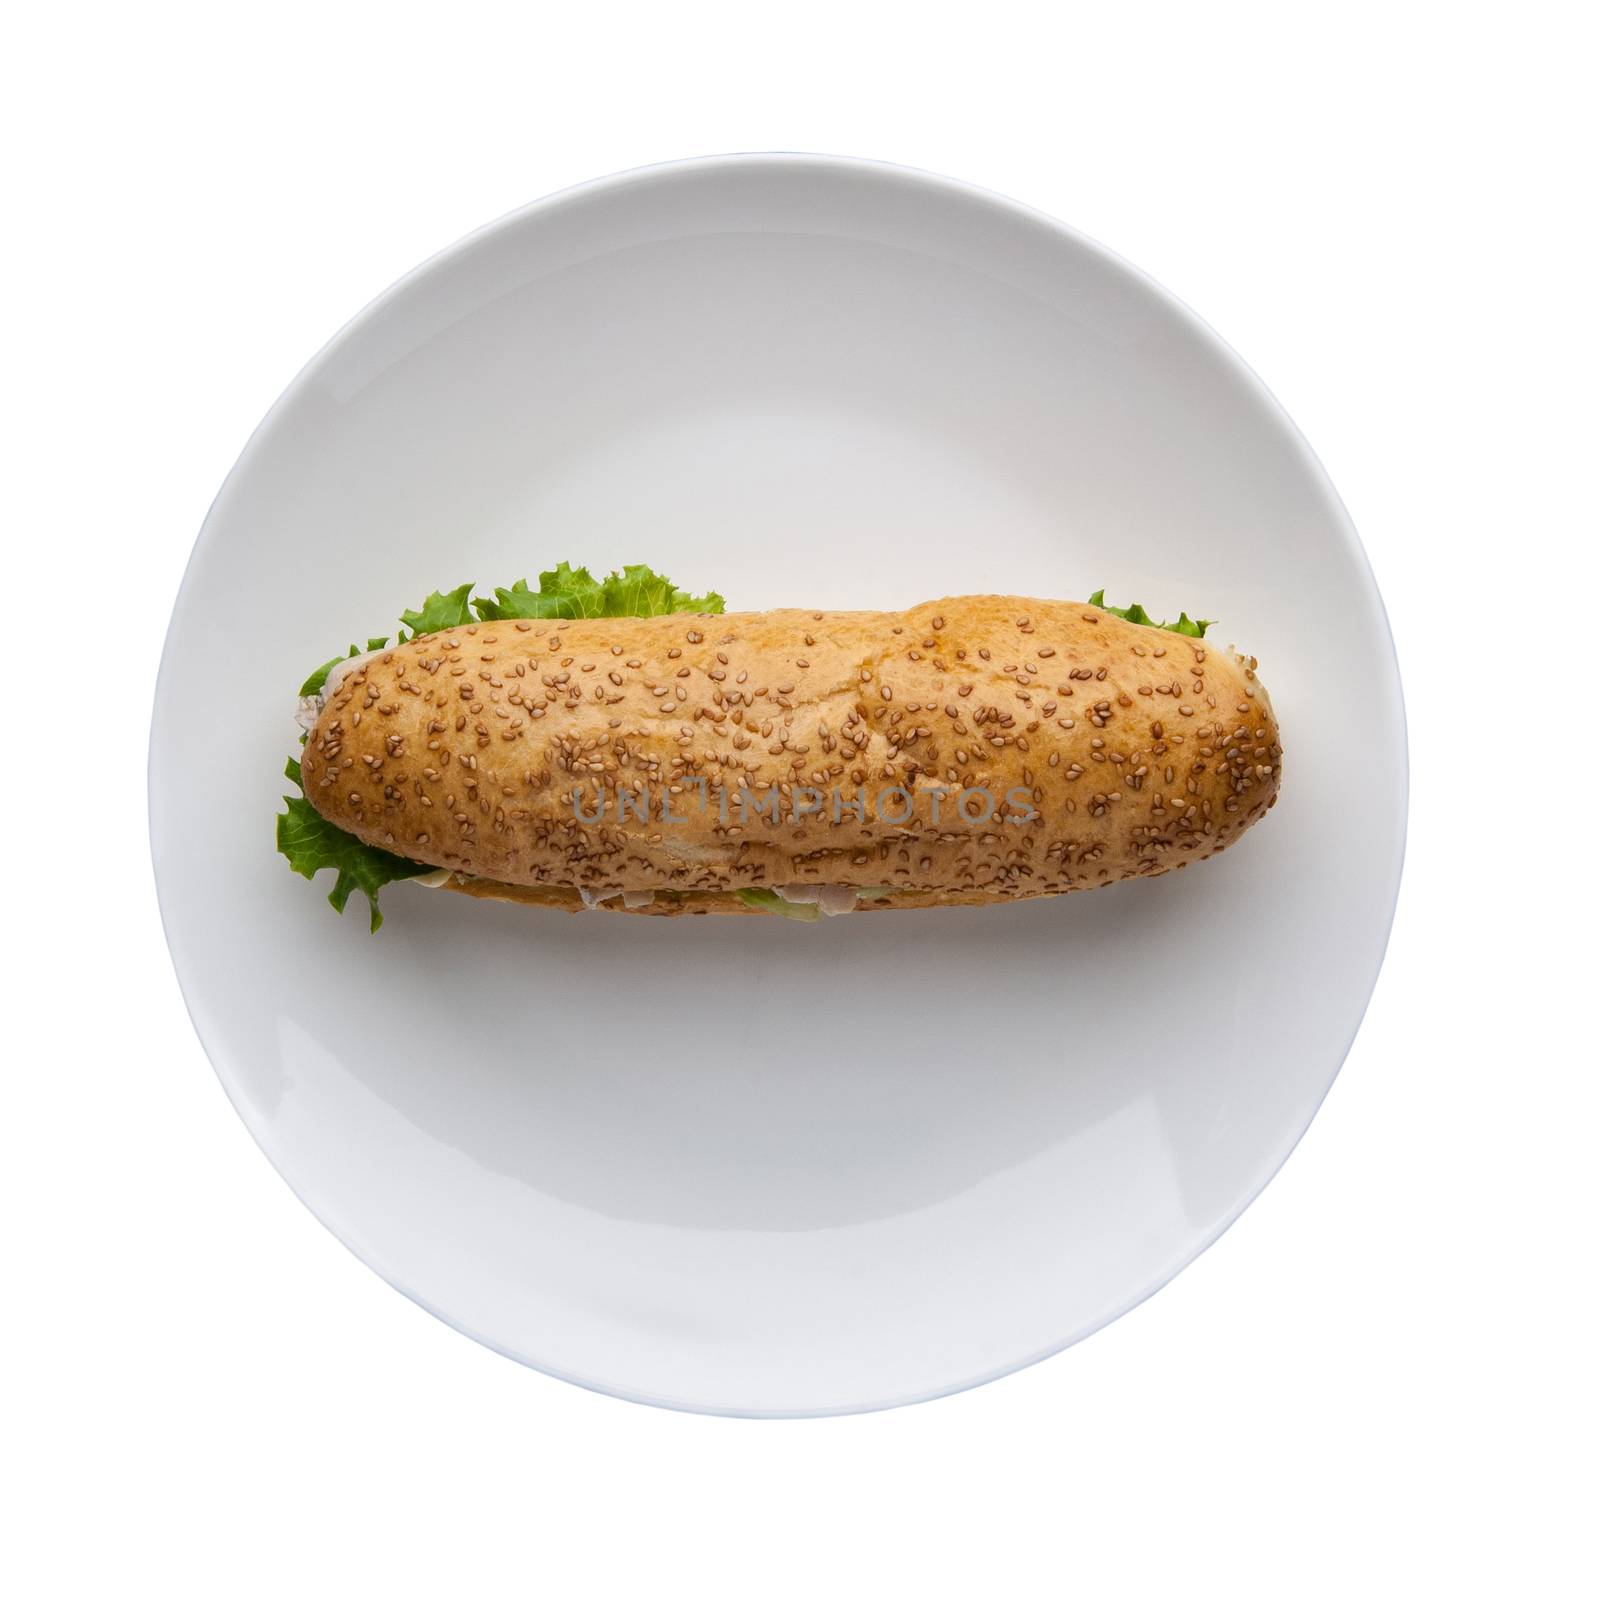 hot dog with lettuce in a plate on a white background, top view